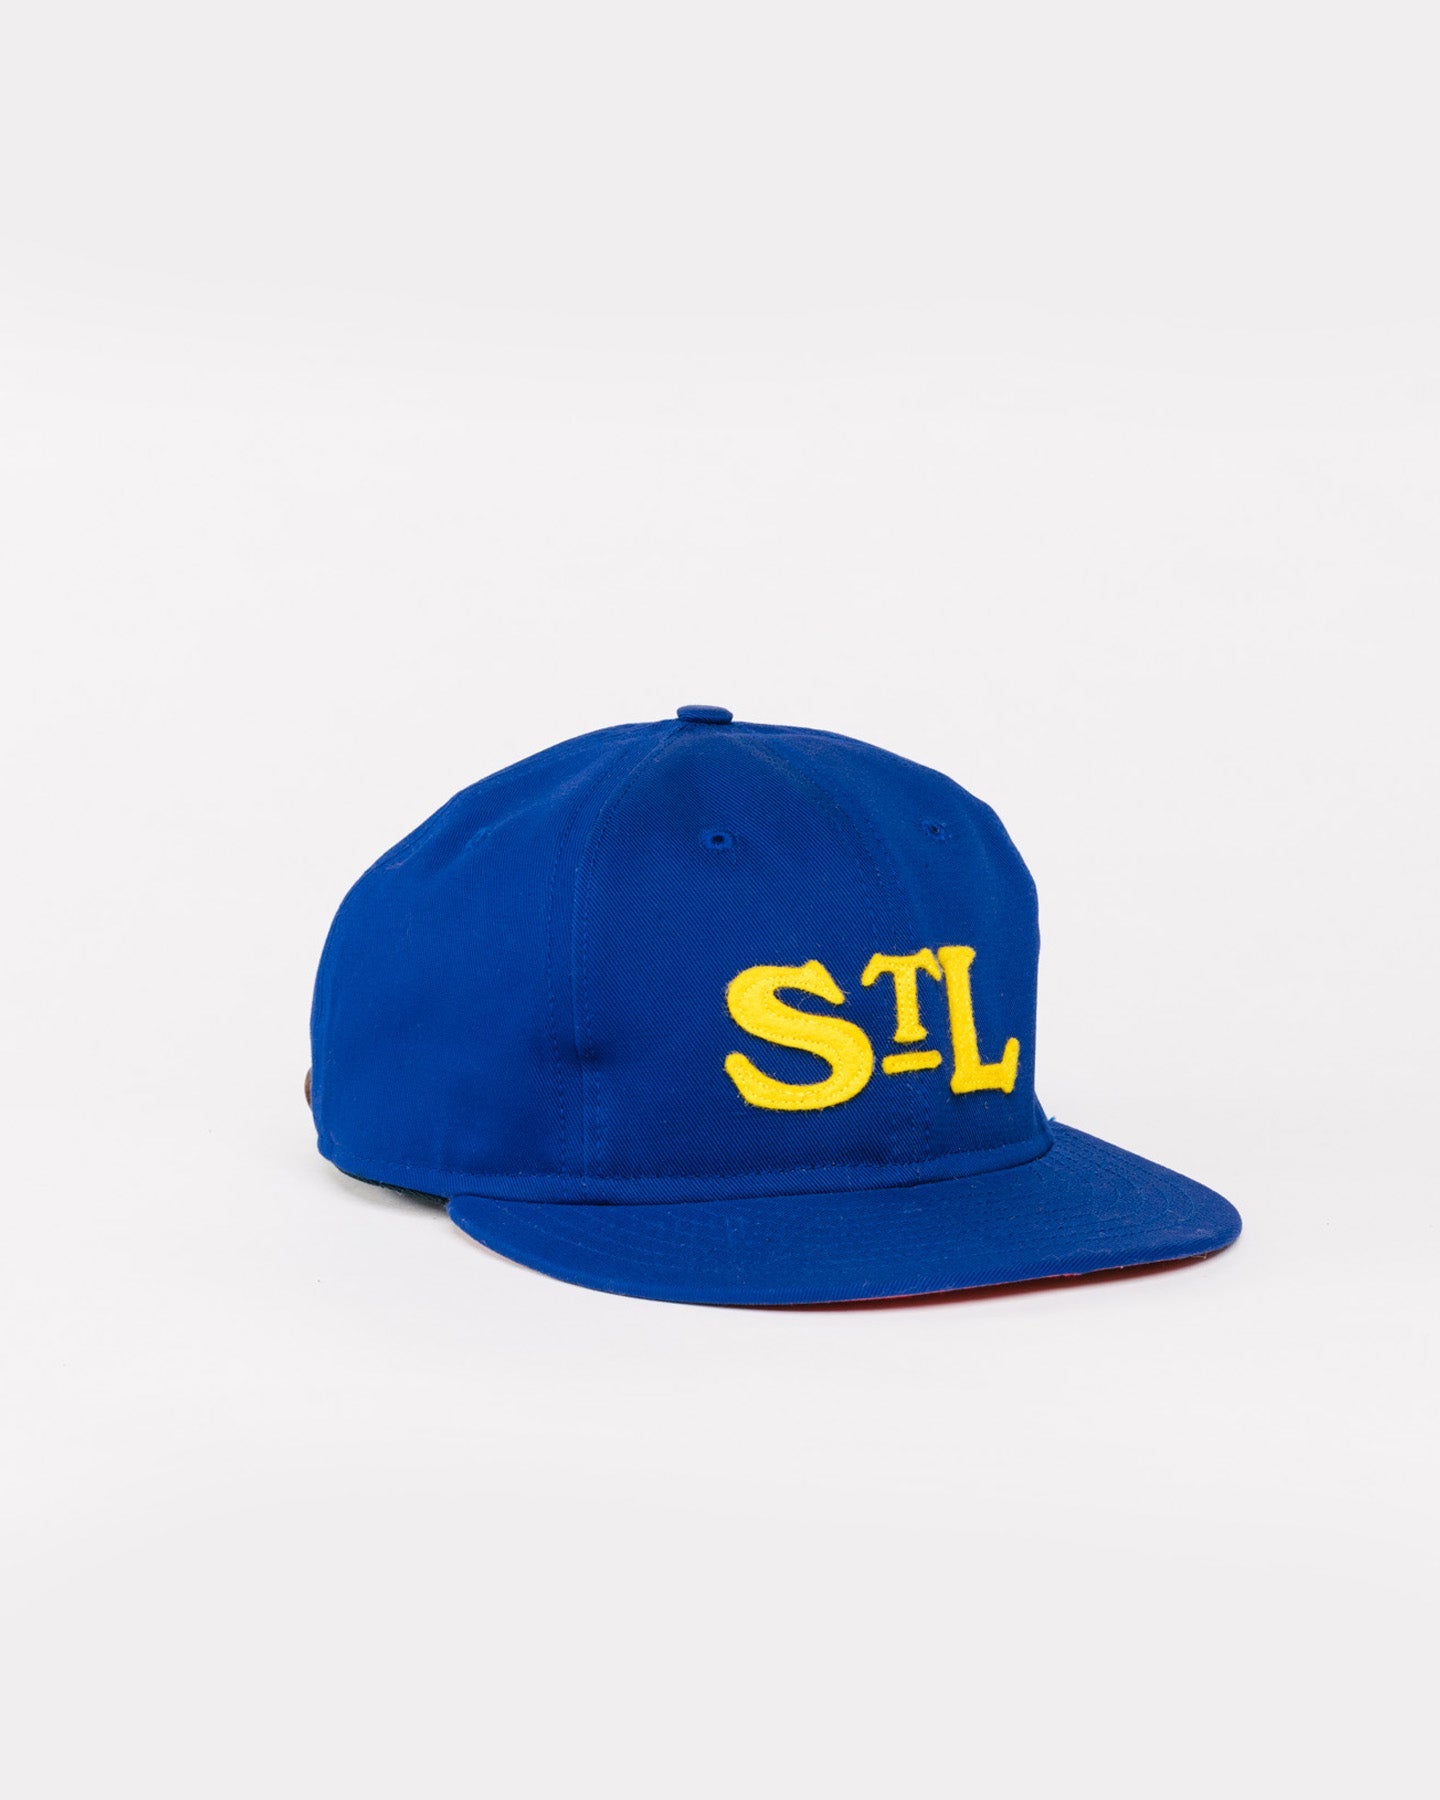 St. Louis BLUES Hat Baseball Ball Cap Flex FITTED ONE SIZE Mesh Back  Relaxed Fit